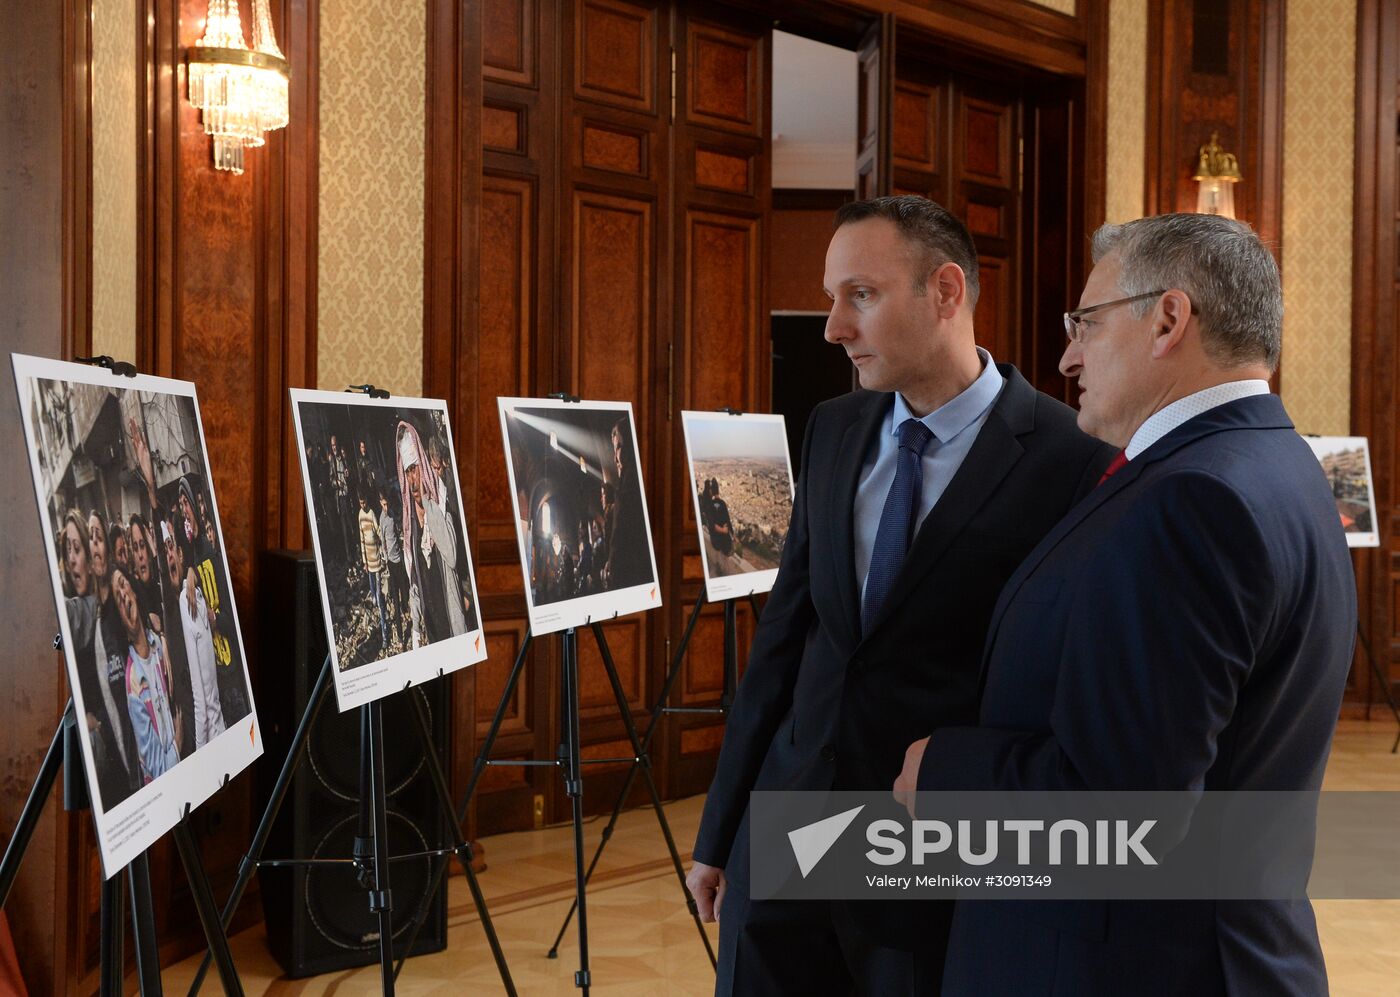 "Photos Chronicle Syria War" exhibition unveiled in Vienna